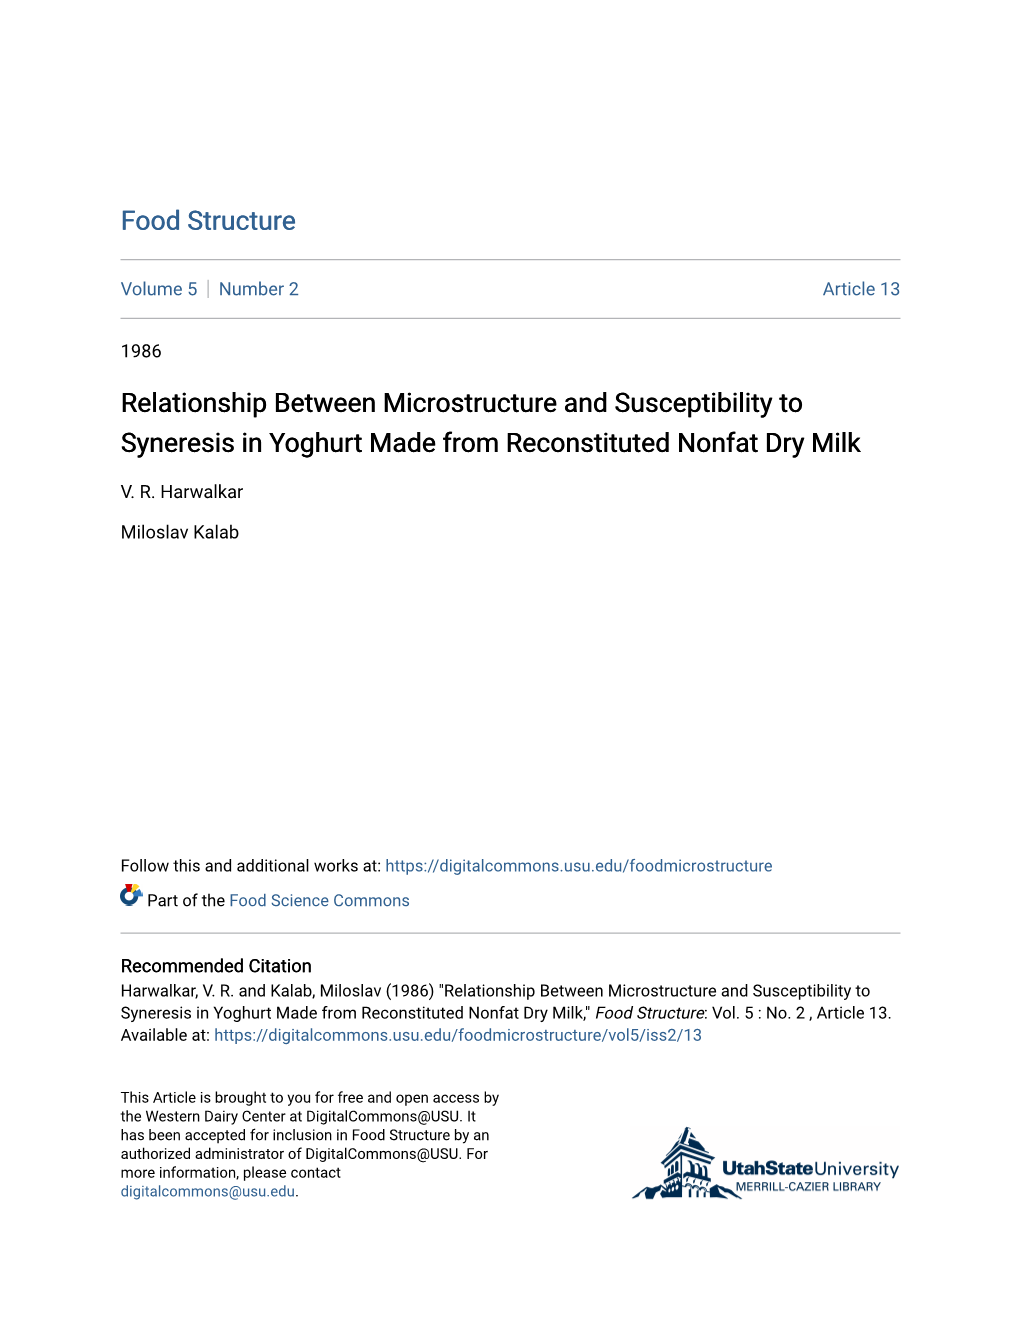 Relationship Between Microstructure and Susceptibility to Syneresis in Yoghurt Made from Reconstituted Nonfat Dry Milk